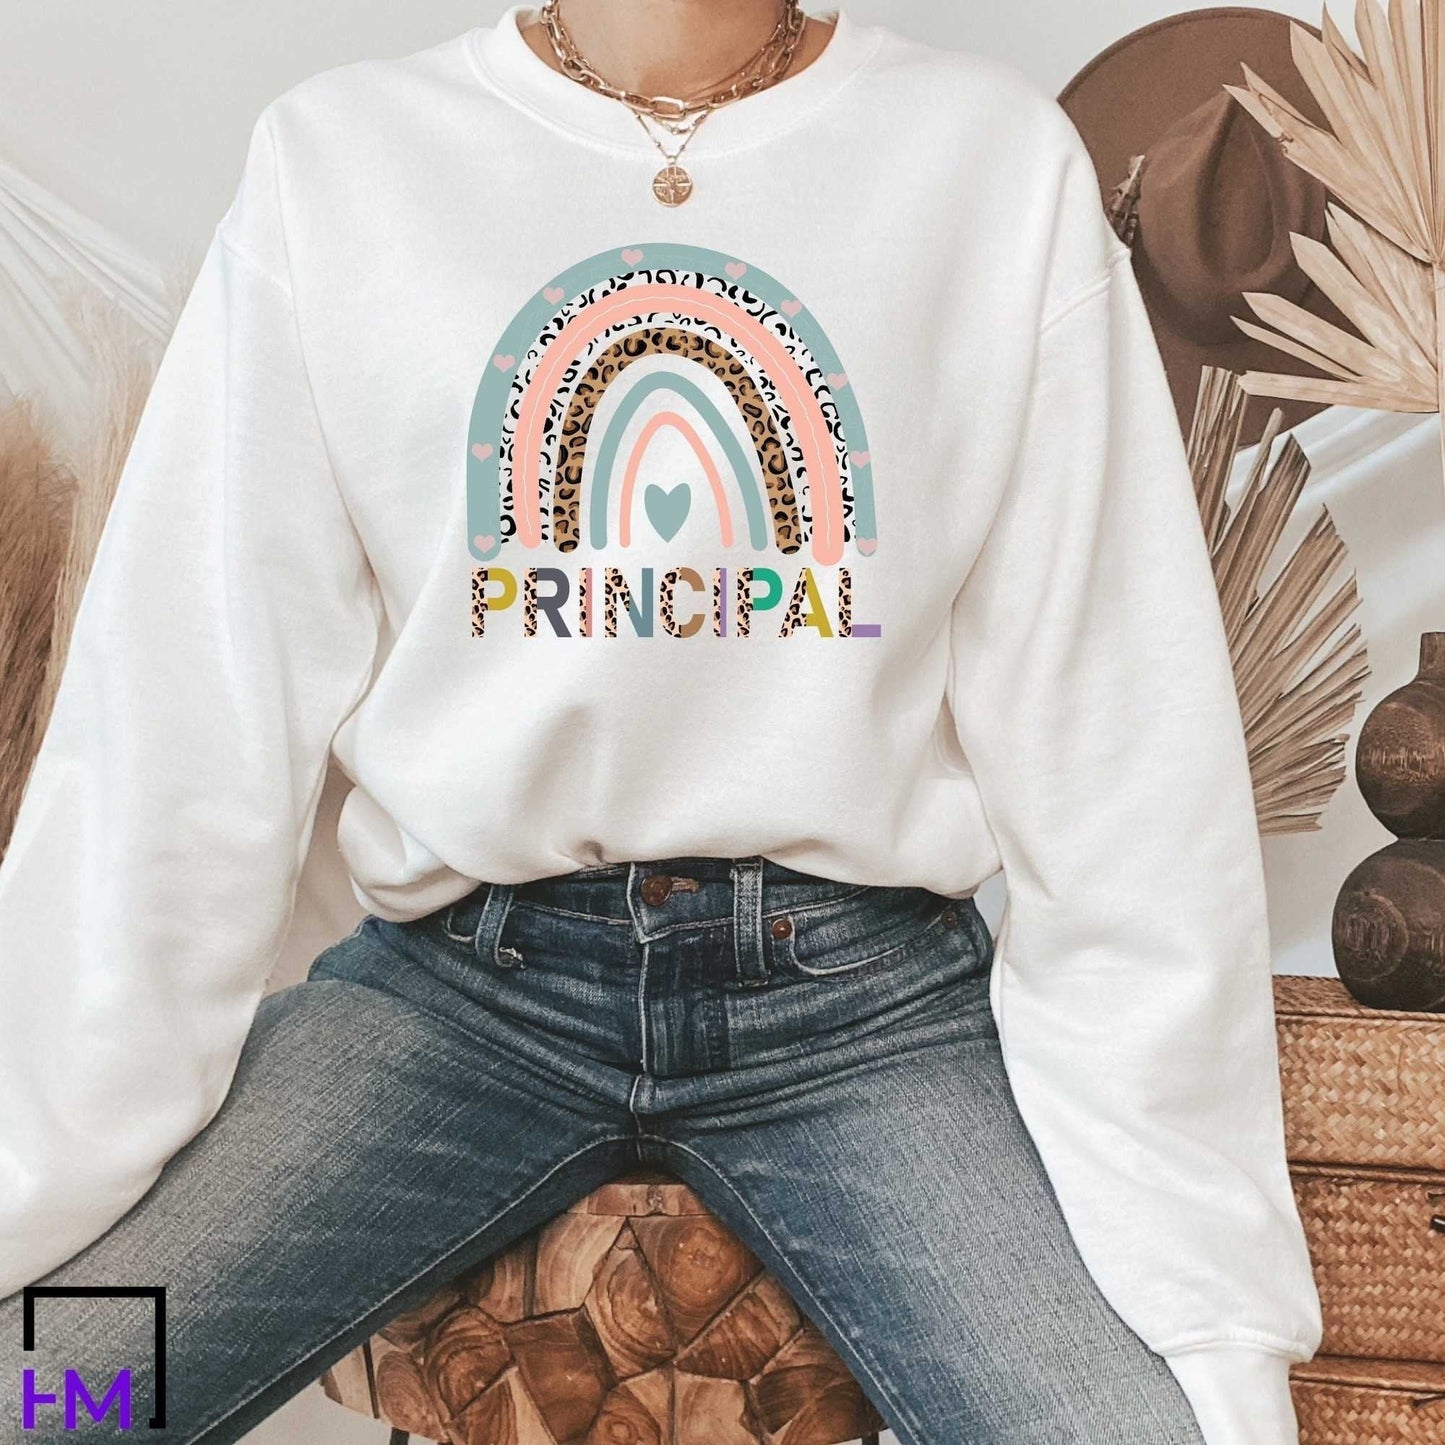 Rainbow Principal Shirt | Great for New Administration, Elementary, Middle, High School Teams, Appreciation Gifts, 100th Day of School Celebration, HMDesignStudioUS